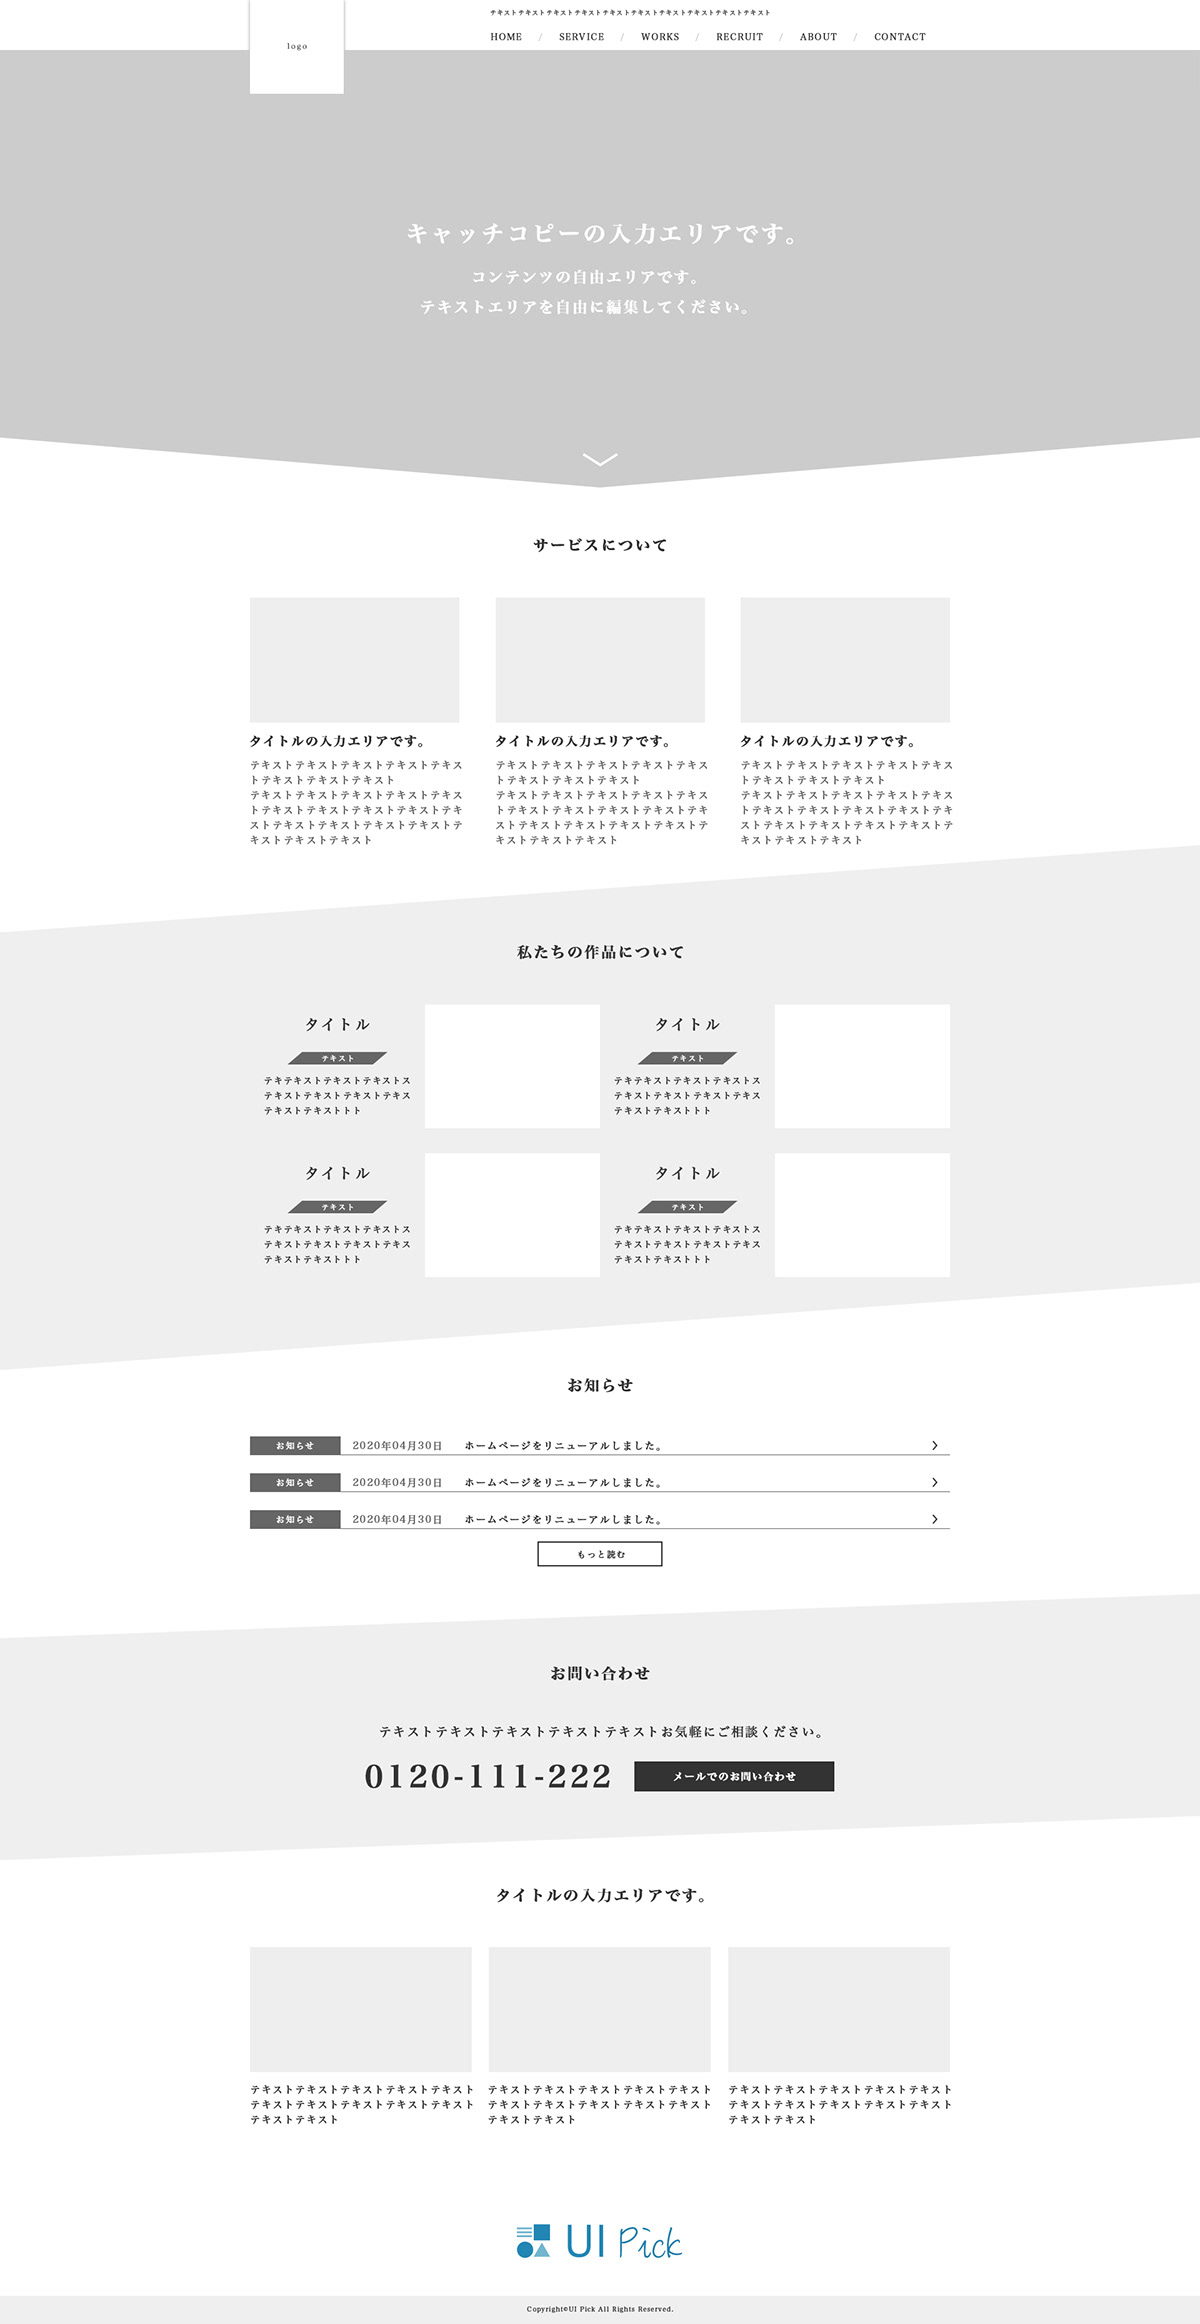 corpolate website free wireframe wireframe template